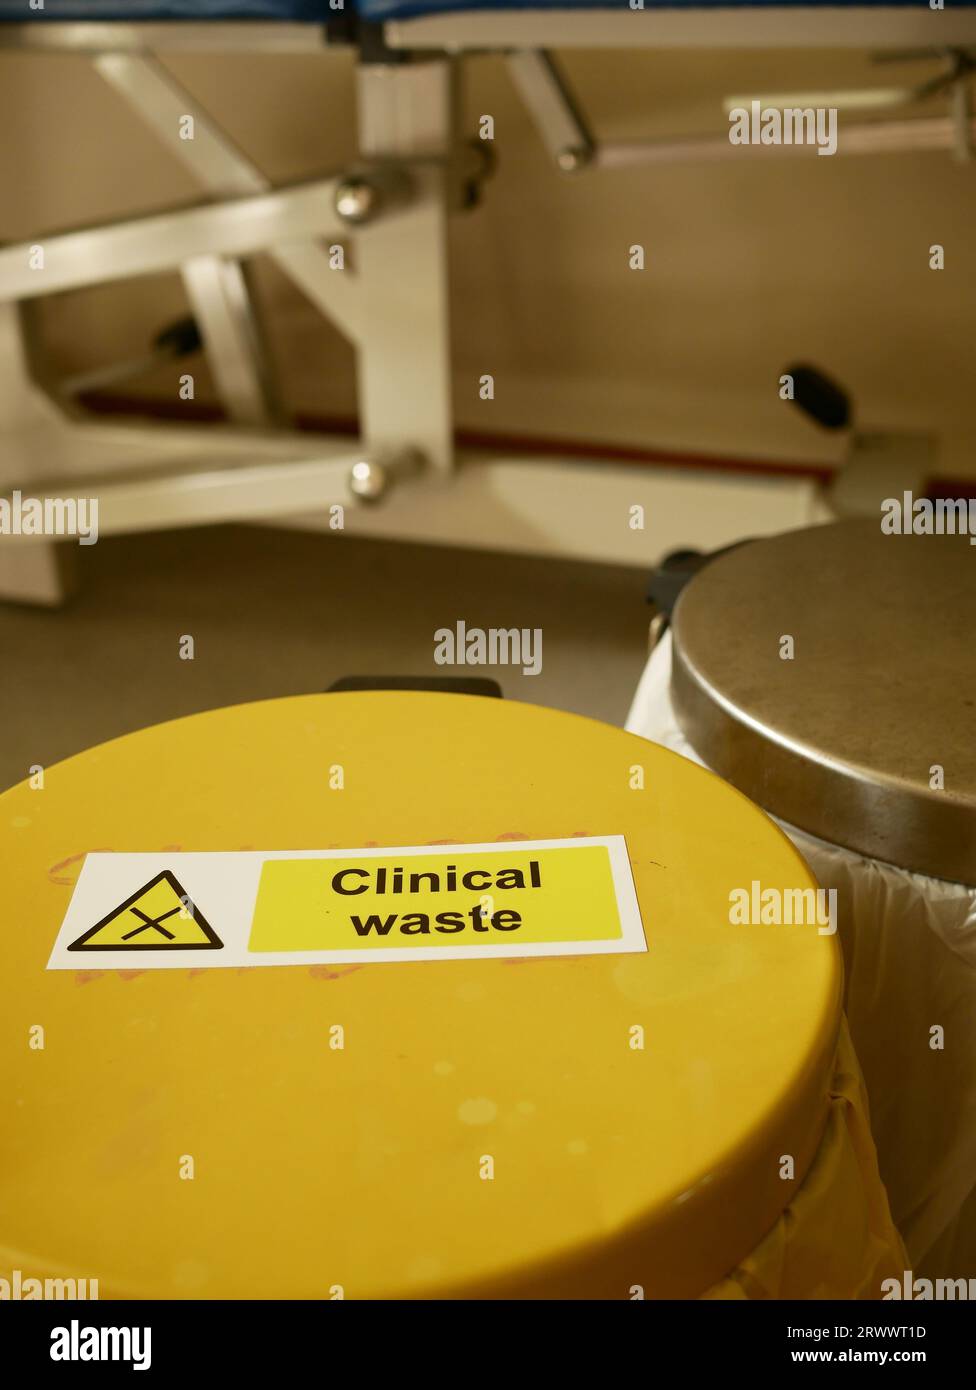 Clinical waste bin in a Doctor's examination room. Stock Photo